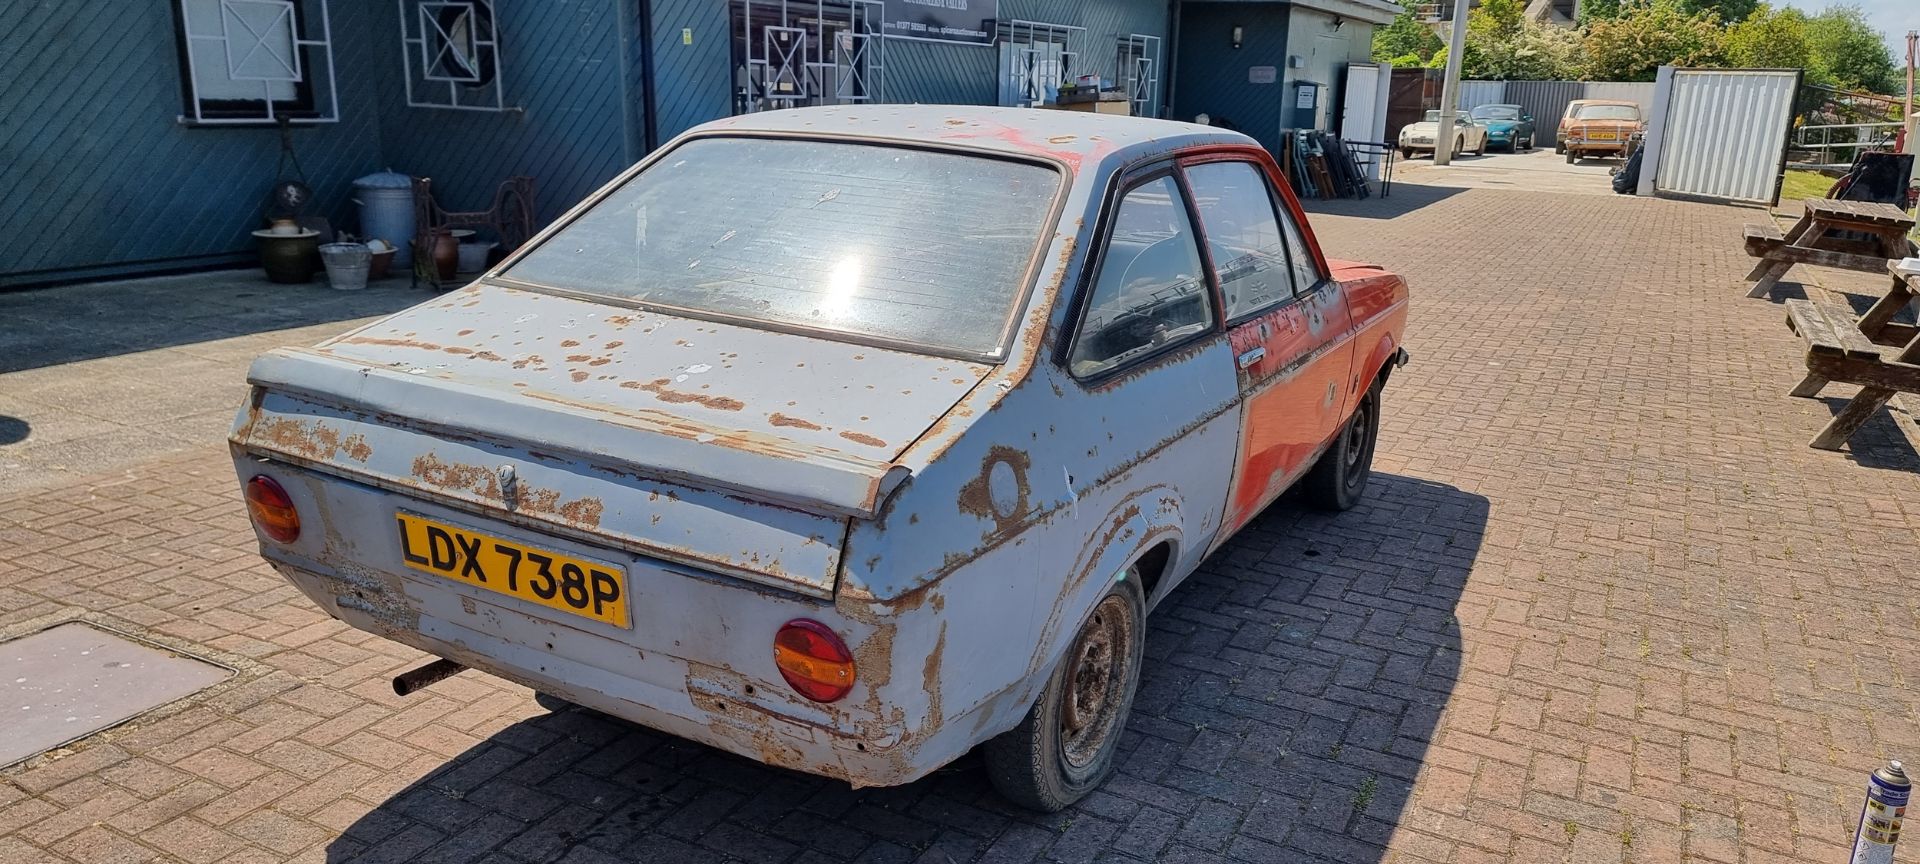 1975 Ford Escort 1.3L, 2 door, 1298cc, project. Registration number LDX 738P. Chassis number - Image 5 of 13